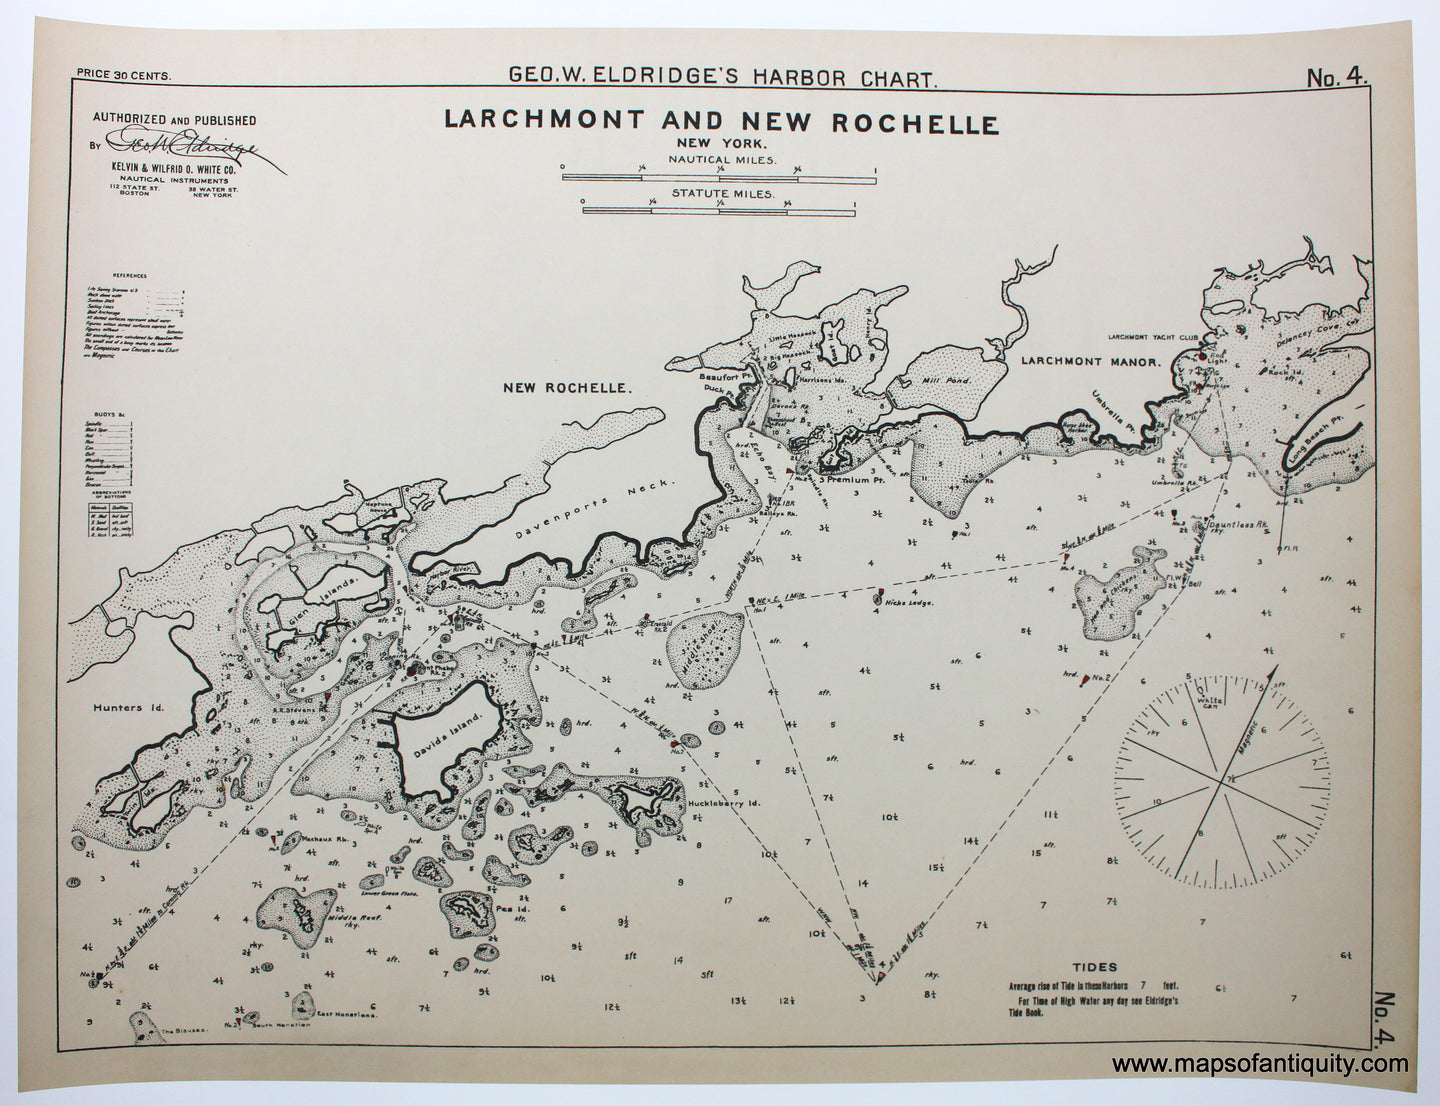 Reproduction-Reproductions-Larchmont-and-New-Rochelle-New-York-Harbor-Harbors-Nautical-Chart-Charts-Antique-Map-Maps-of-Antiquity